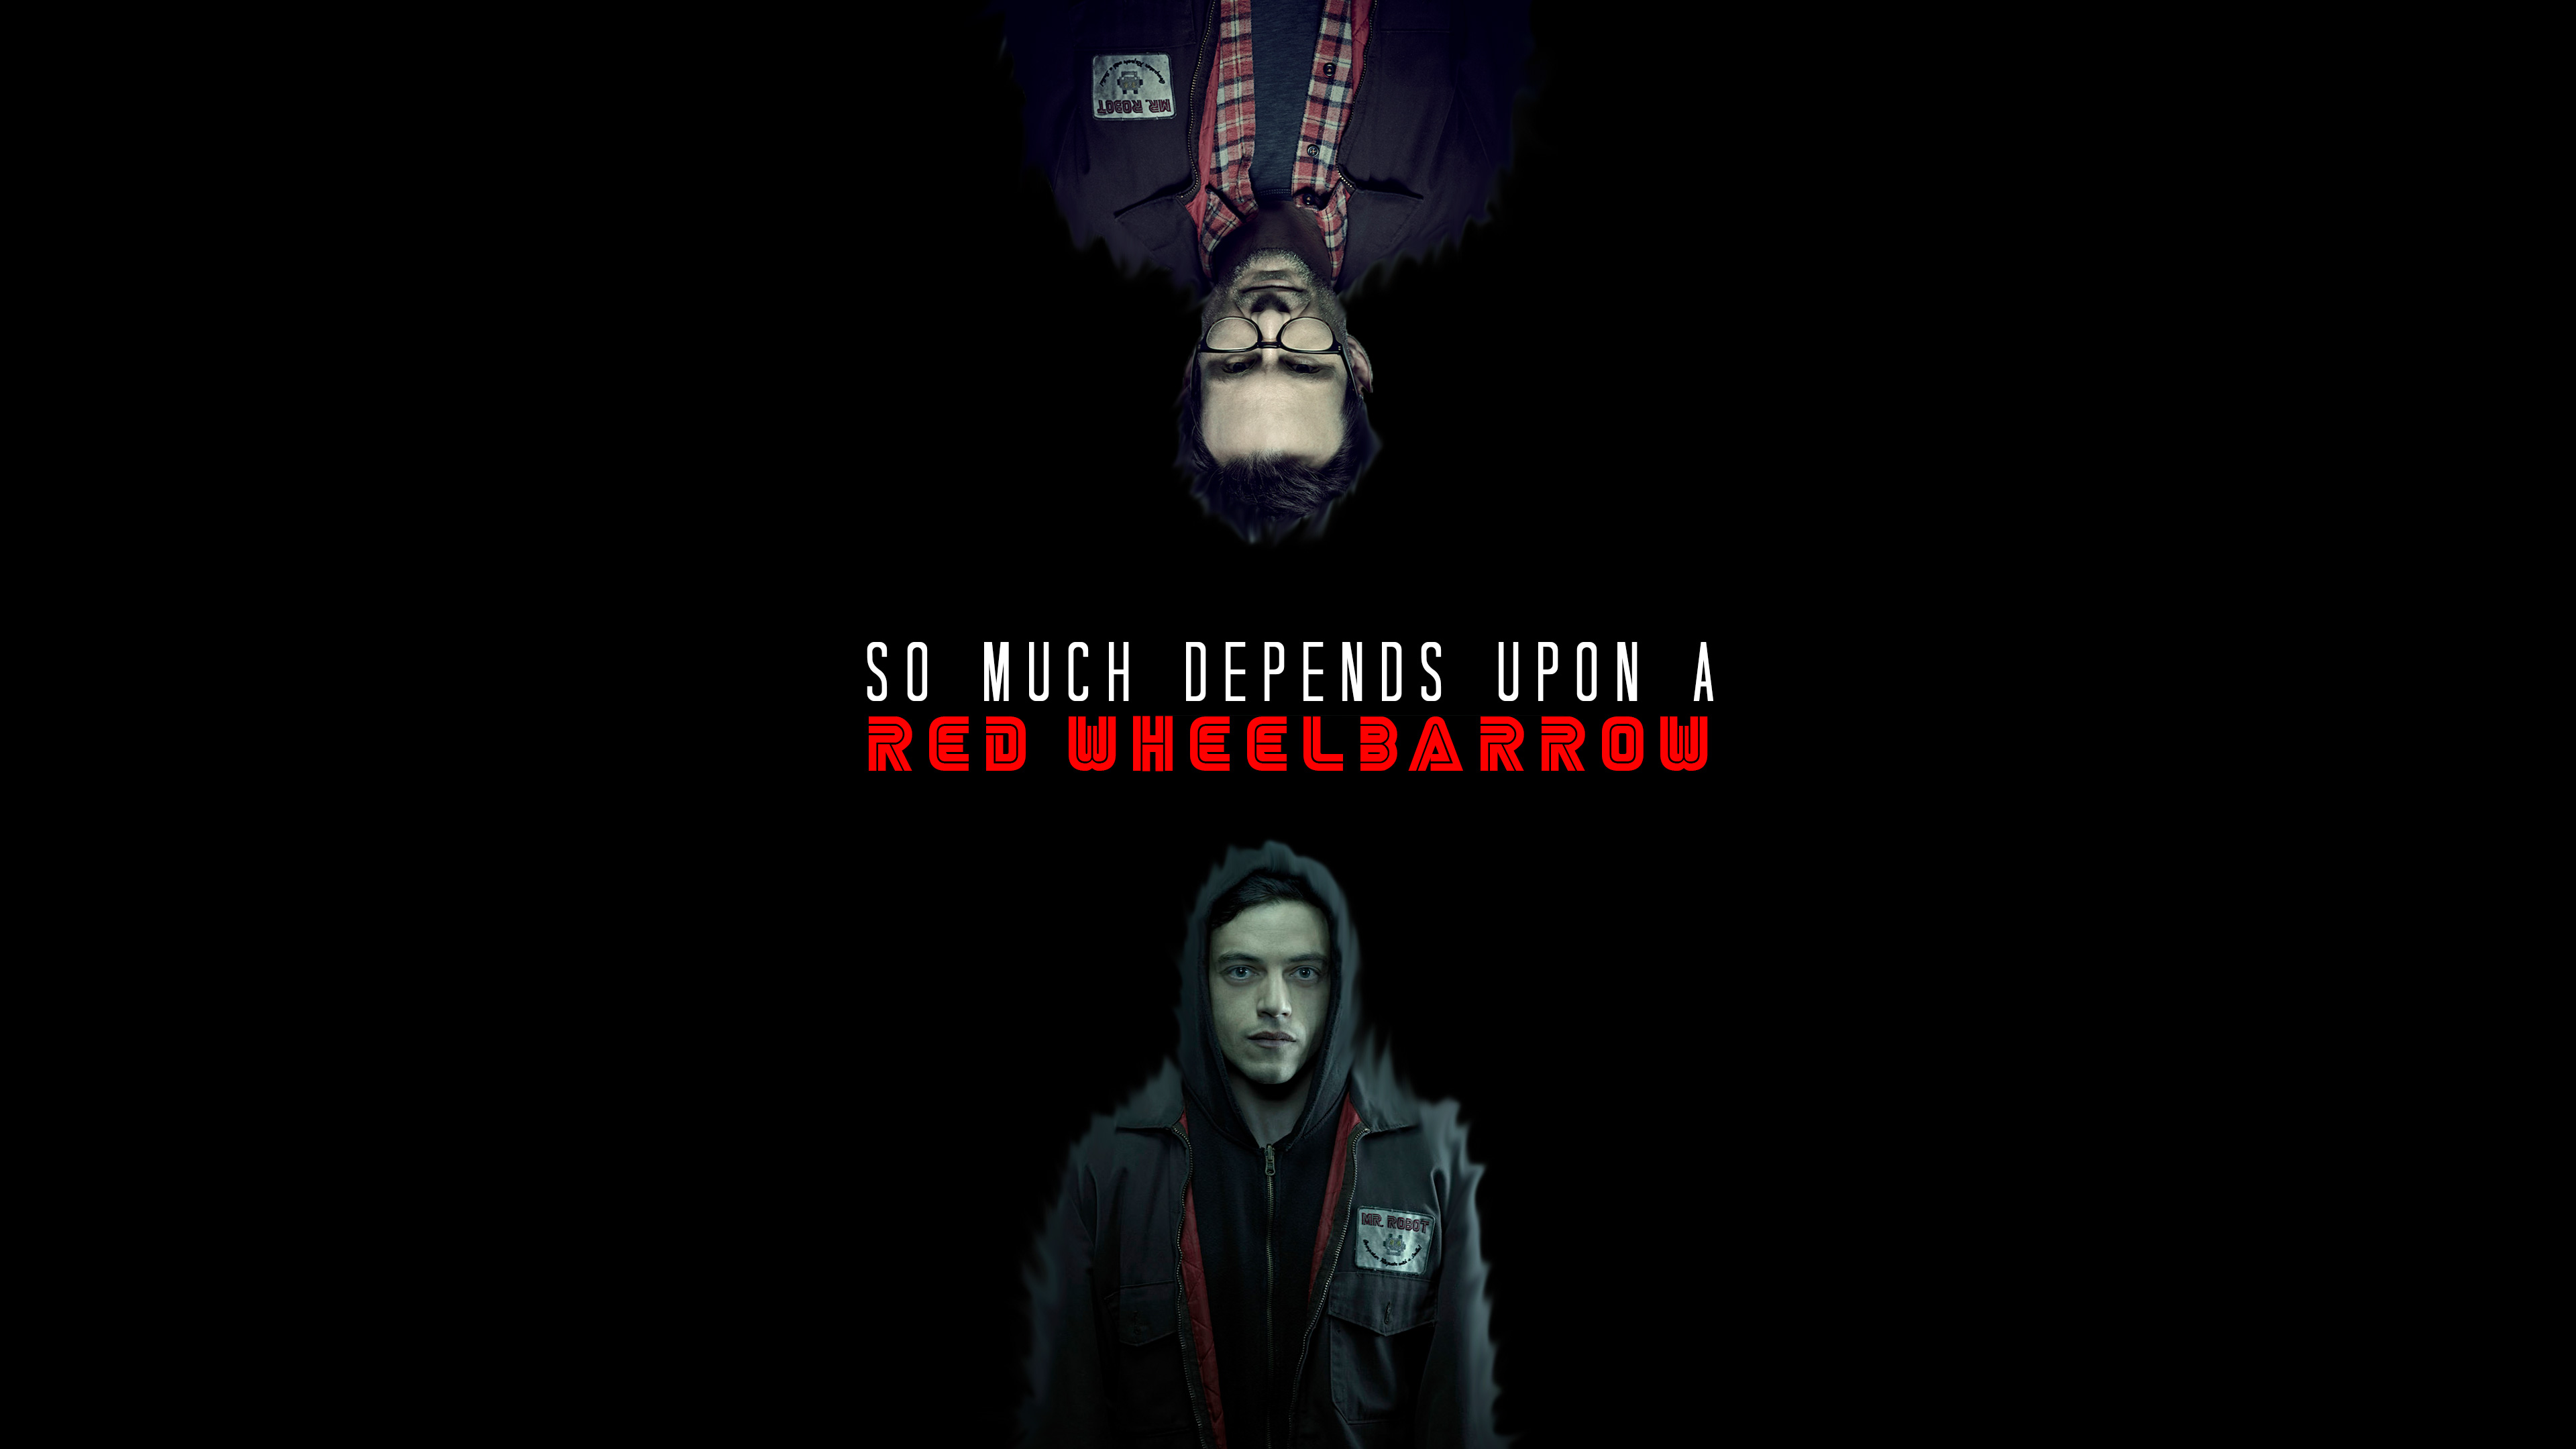 Some Mr. Robot Wallpapers I made [1920x1080] - Movies and TV post - Imgur